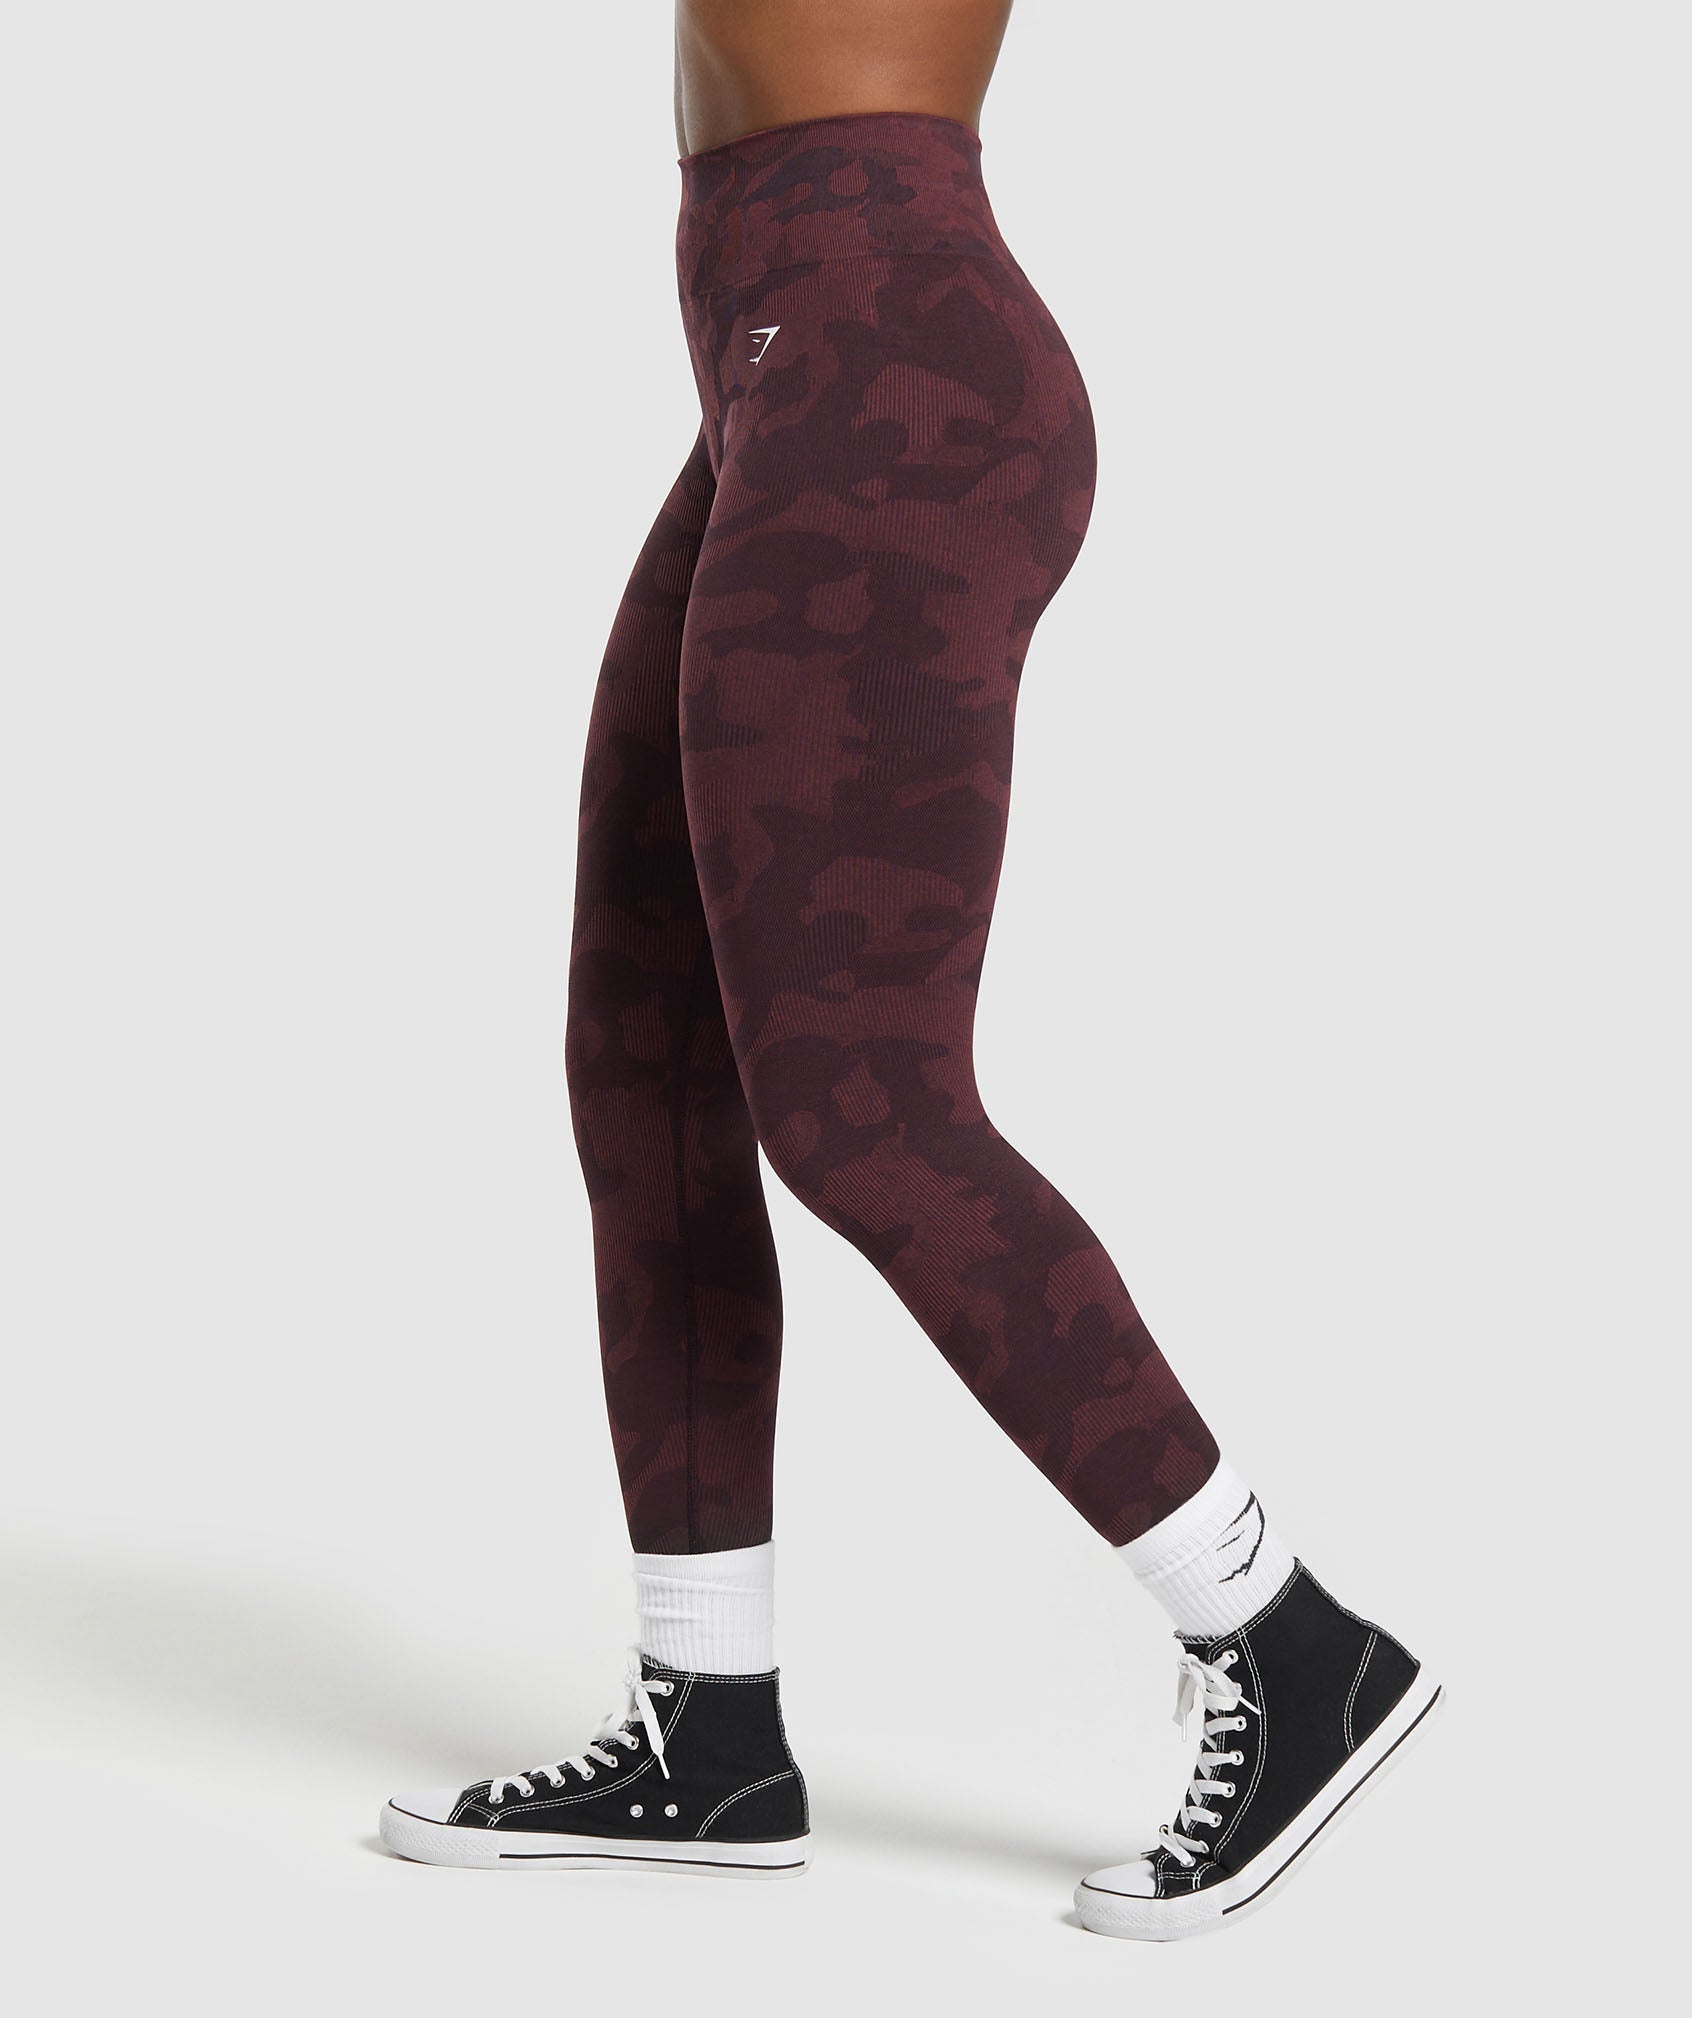 seamless custom leggings, seamless custom leggings Suppliers and